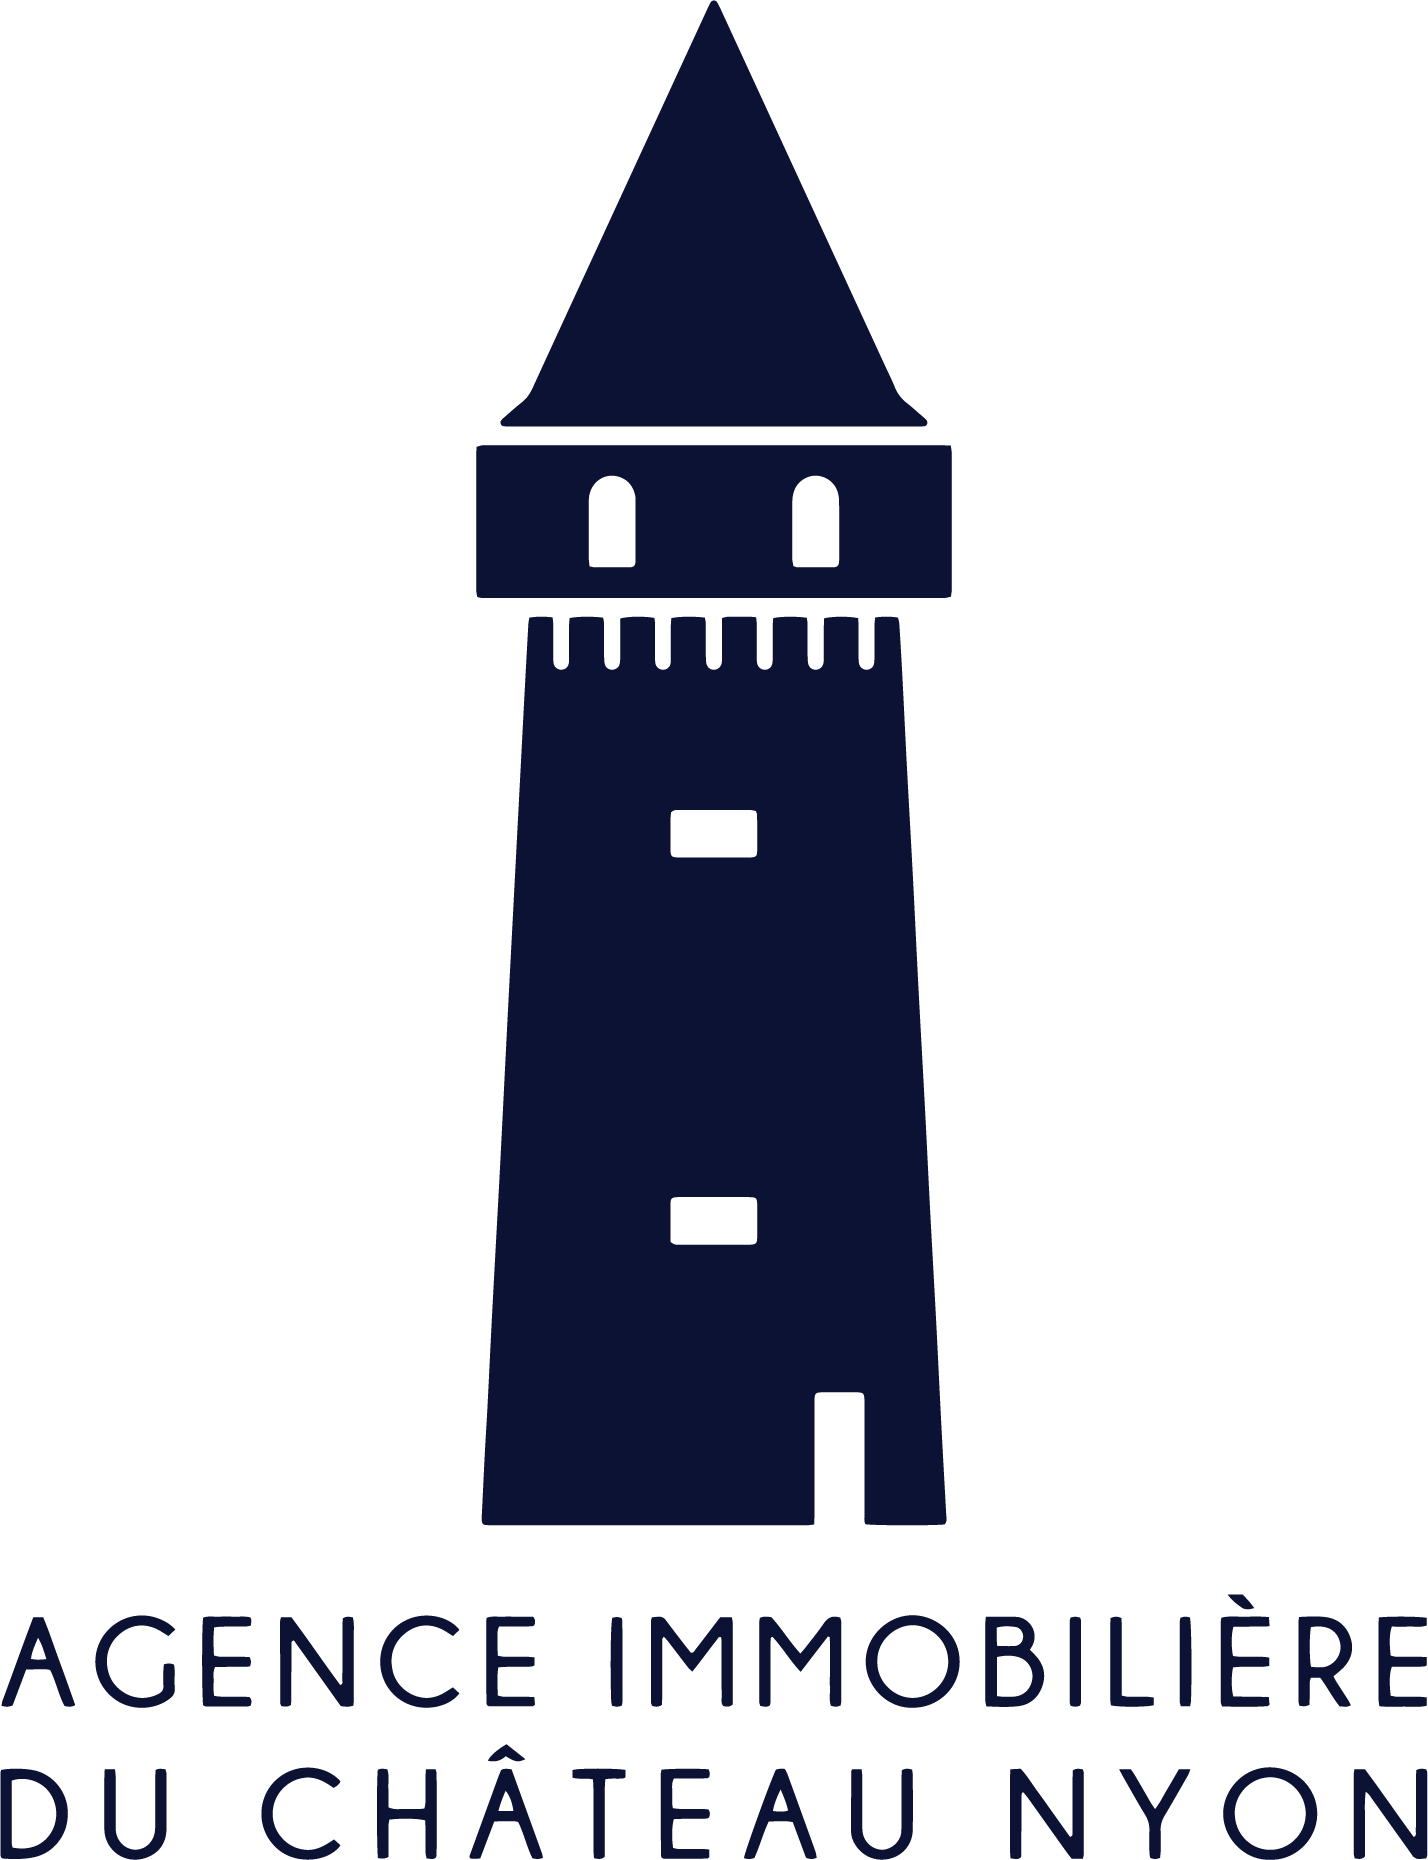 Agence Immobiliere du chateay Nyon - logo